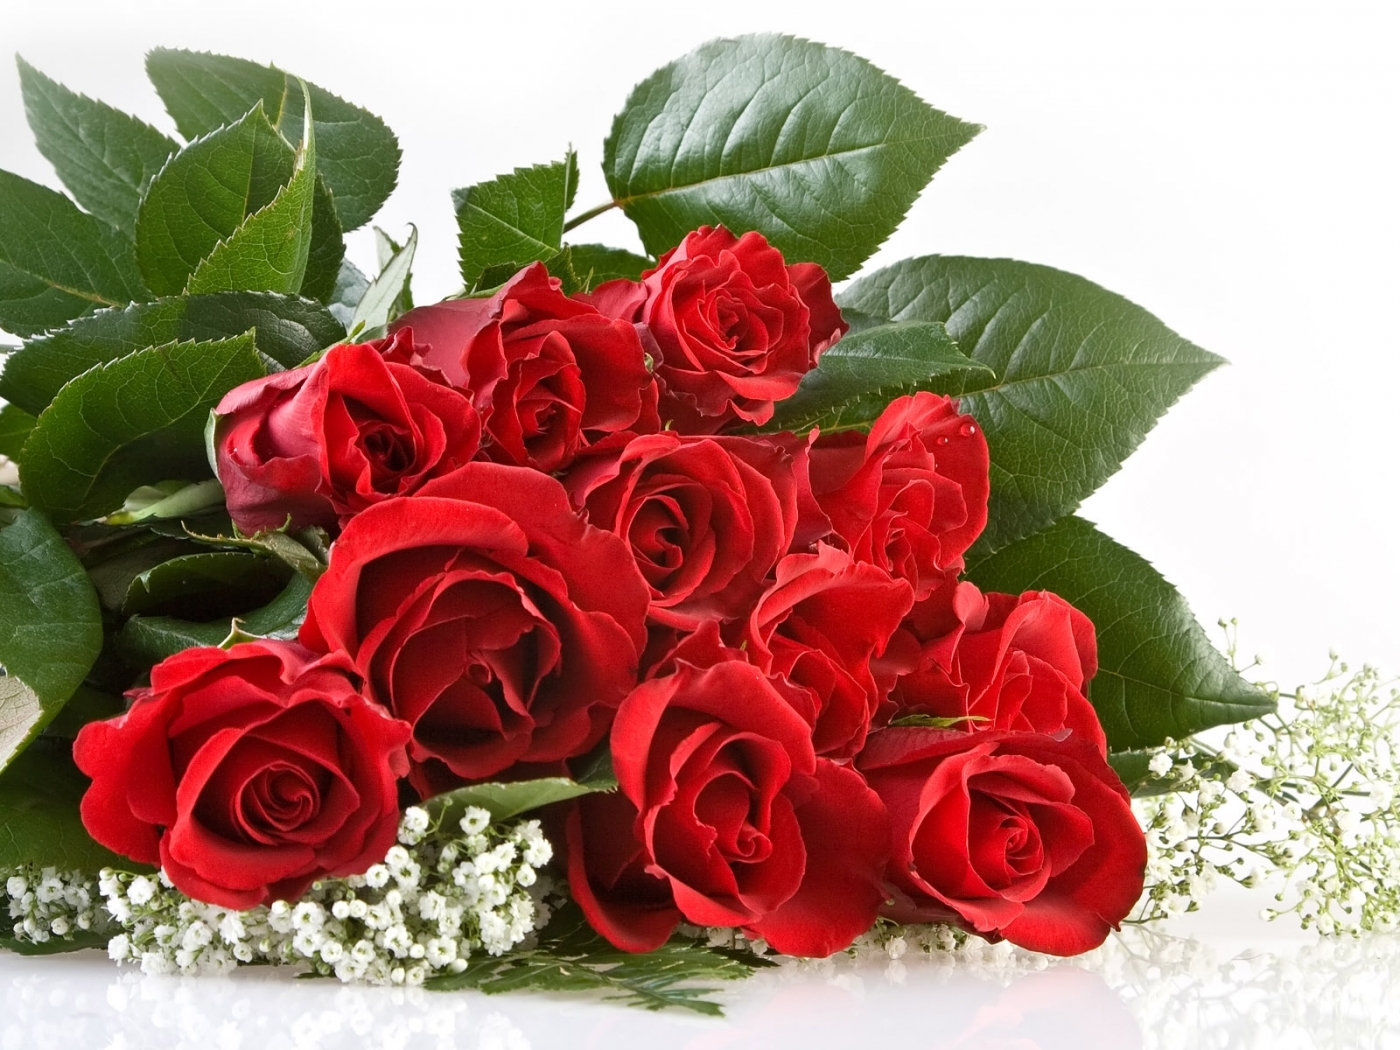 bouquets, roses, plants, flowers, red HD wallpaper